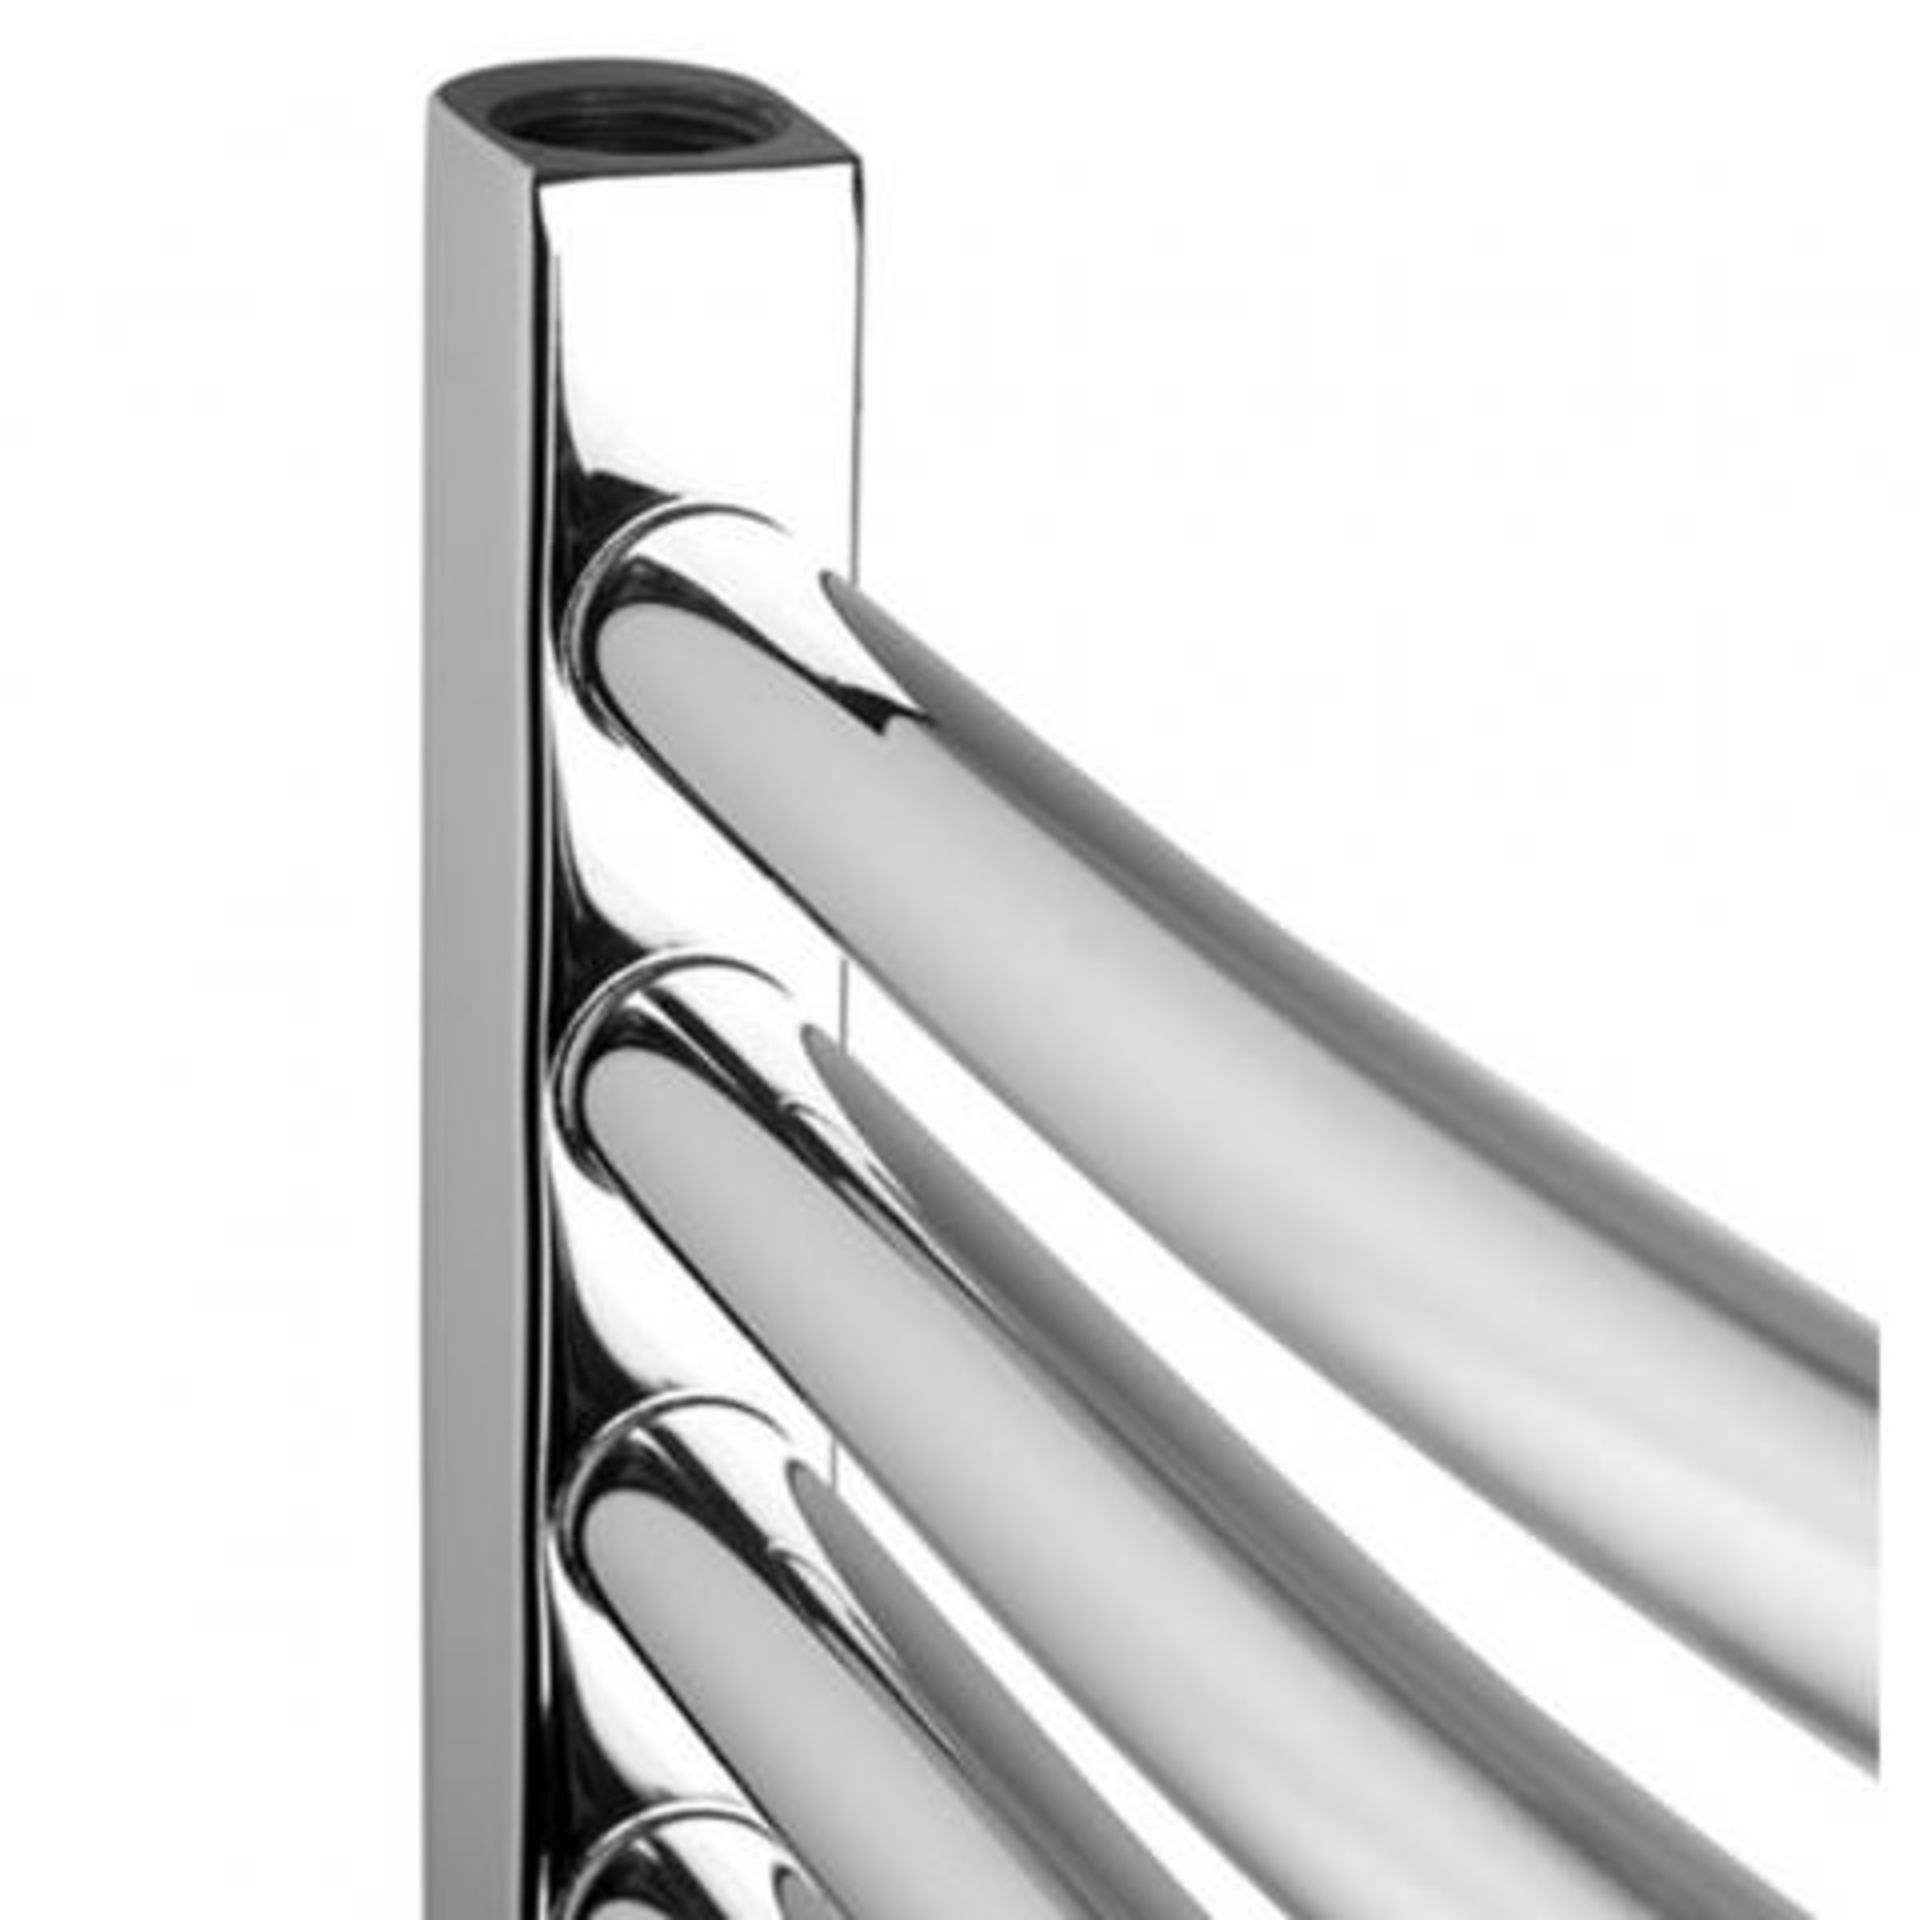 (H109) 1600x400mm - 20mm Tubes - Chrome Curved Rail Ladder Towel Radiator. Our Nancy 1600x400mm - Image 2 of 3